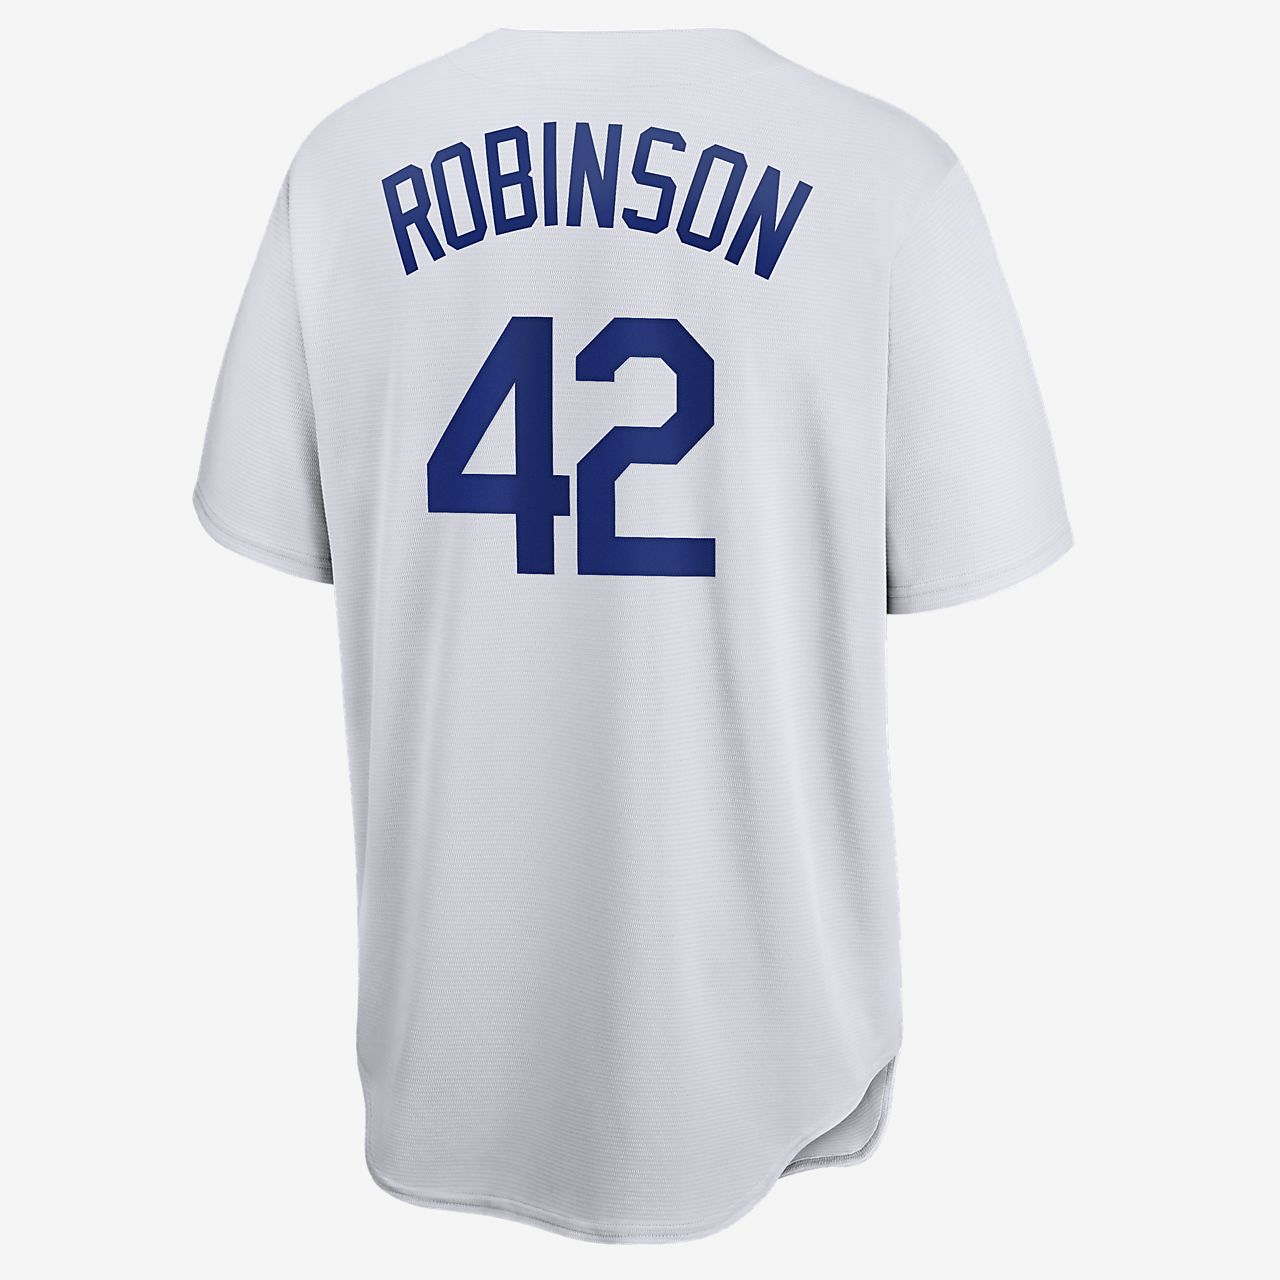 brooklyn dodgers jackie robinson youth jersey